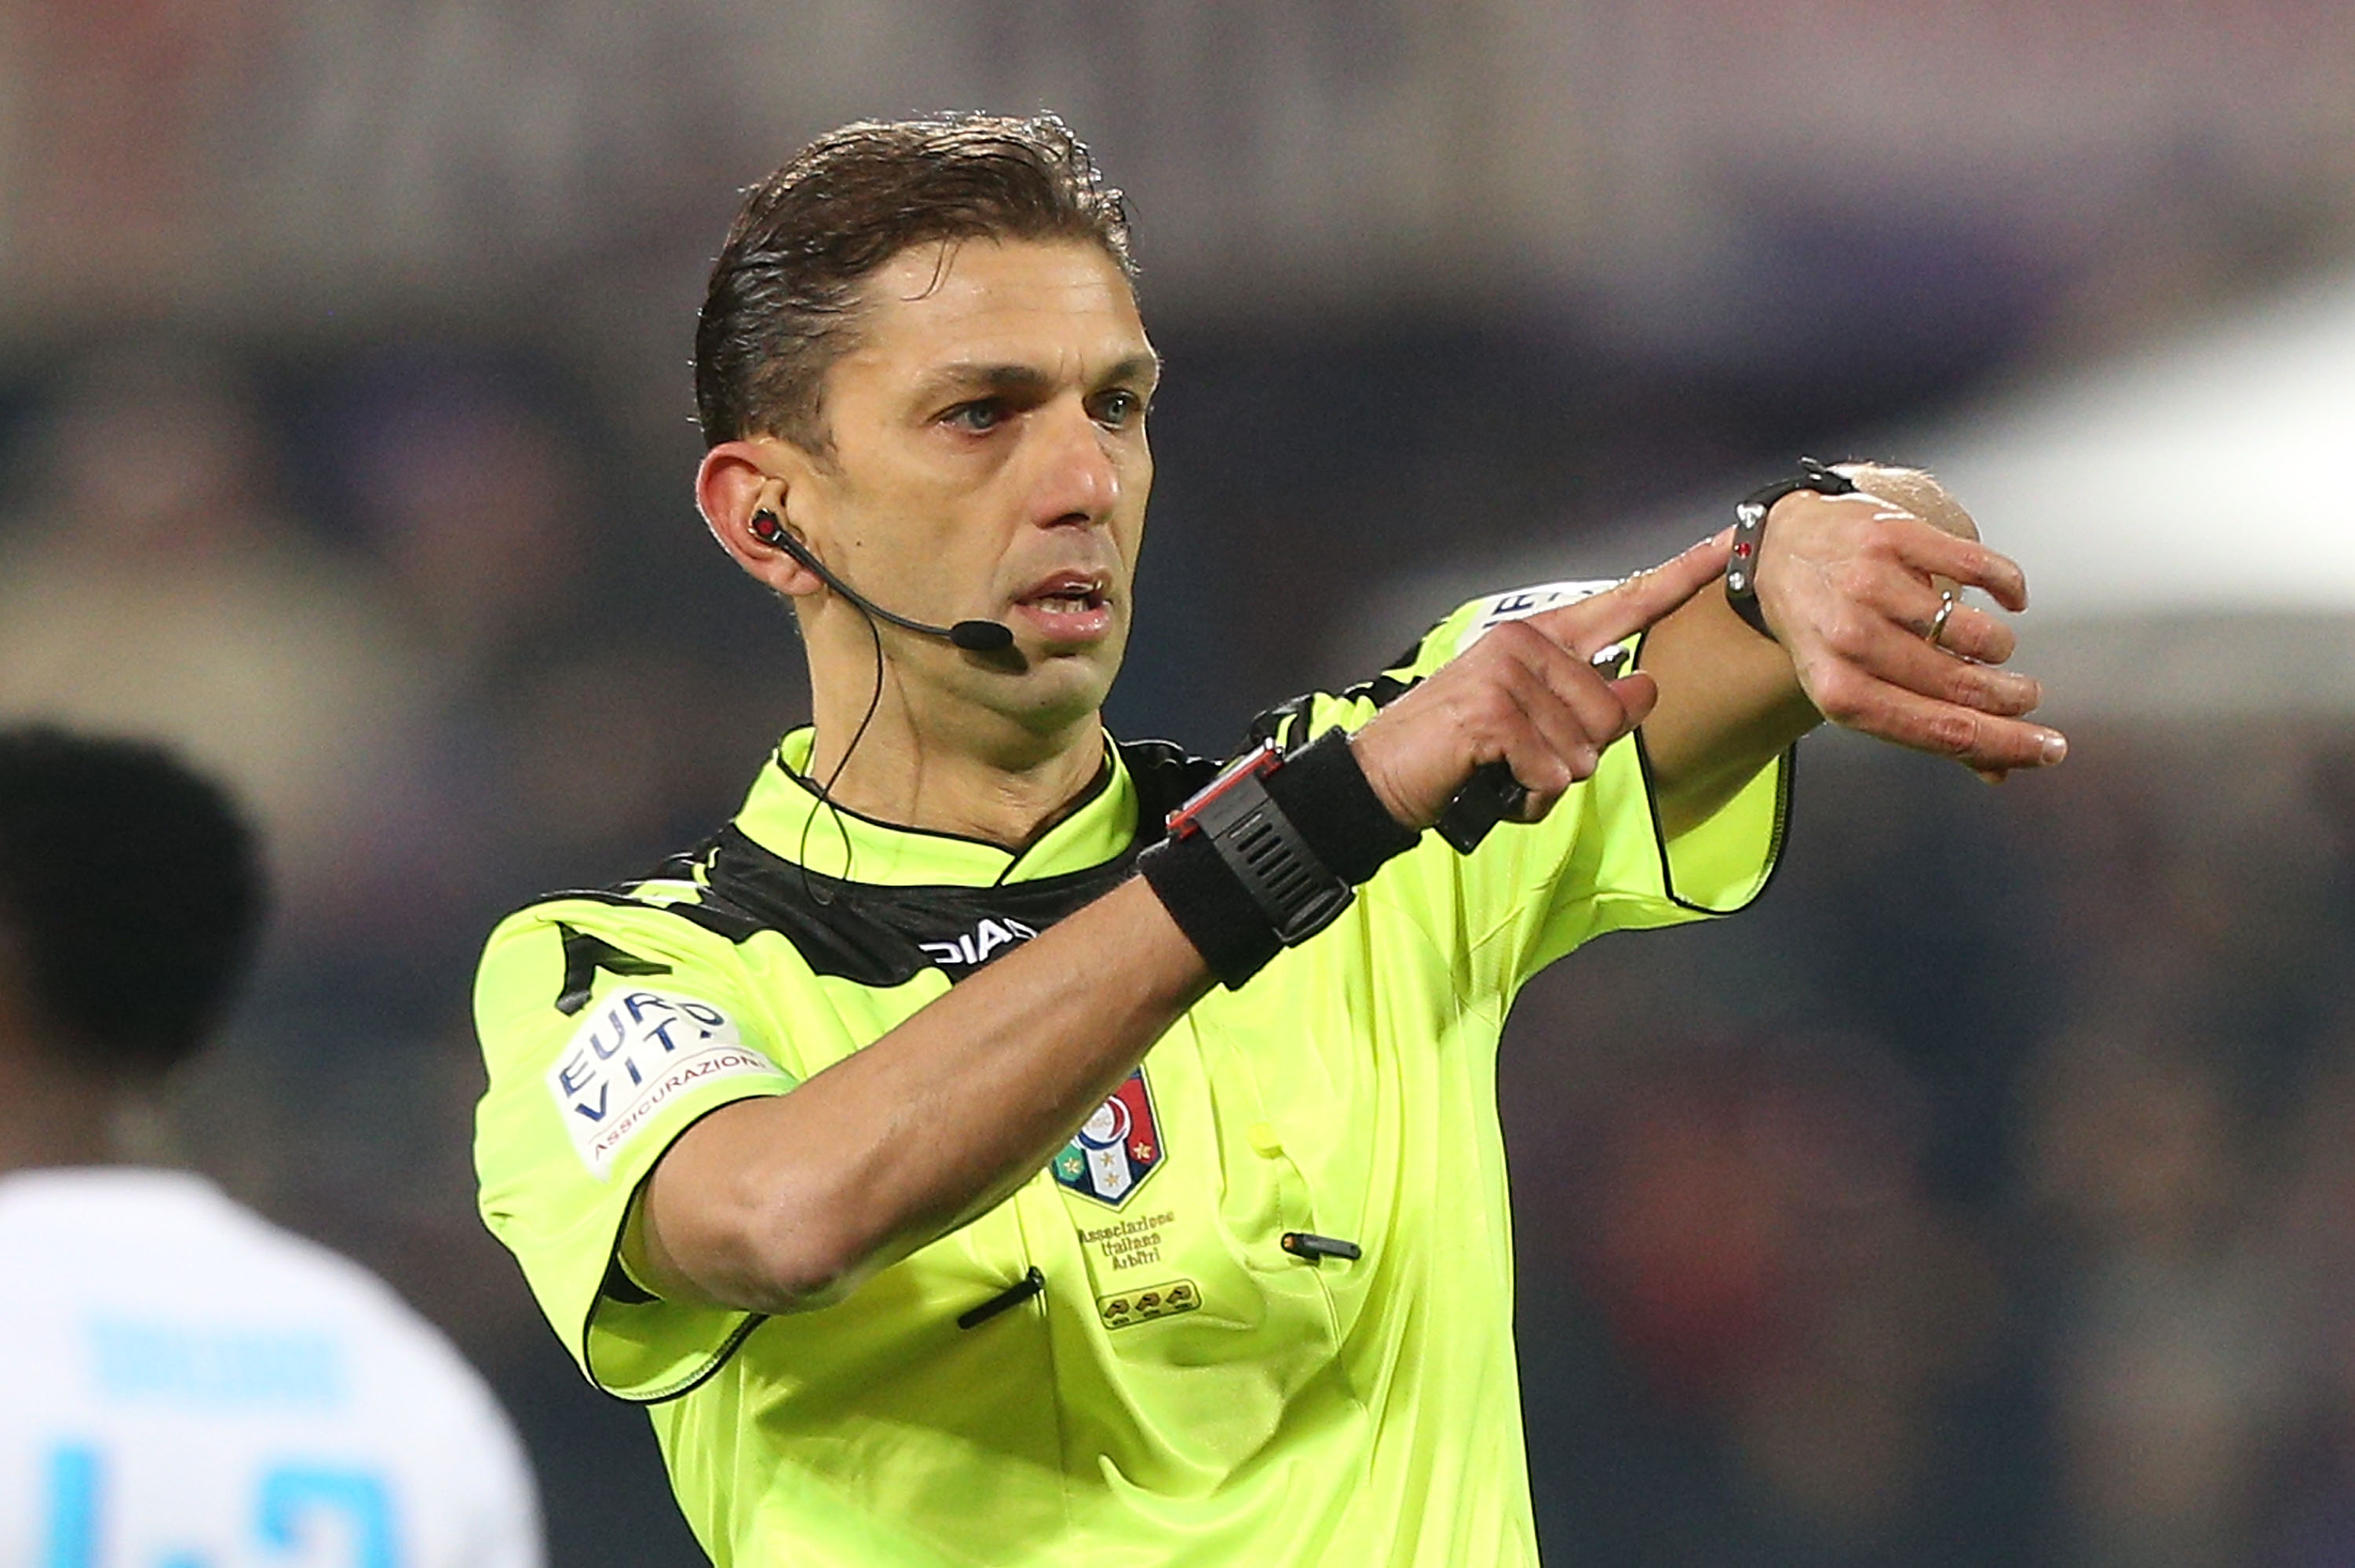 Tagliavento to referee Inter for the 33rd time in the derby